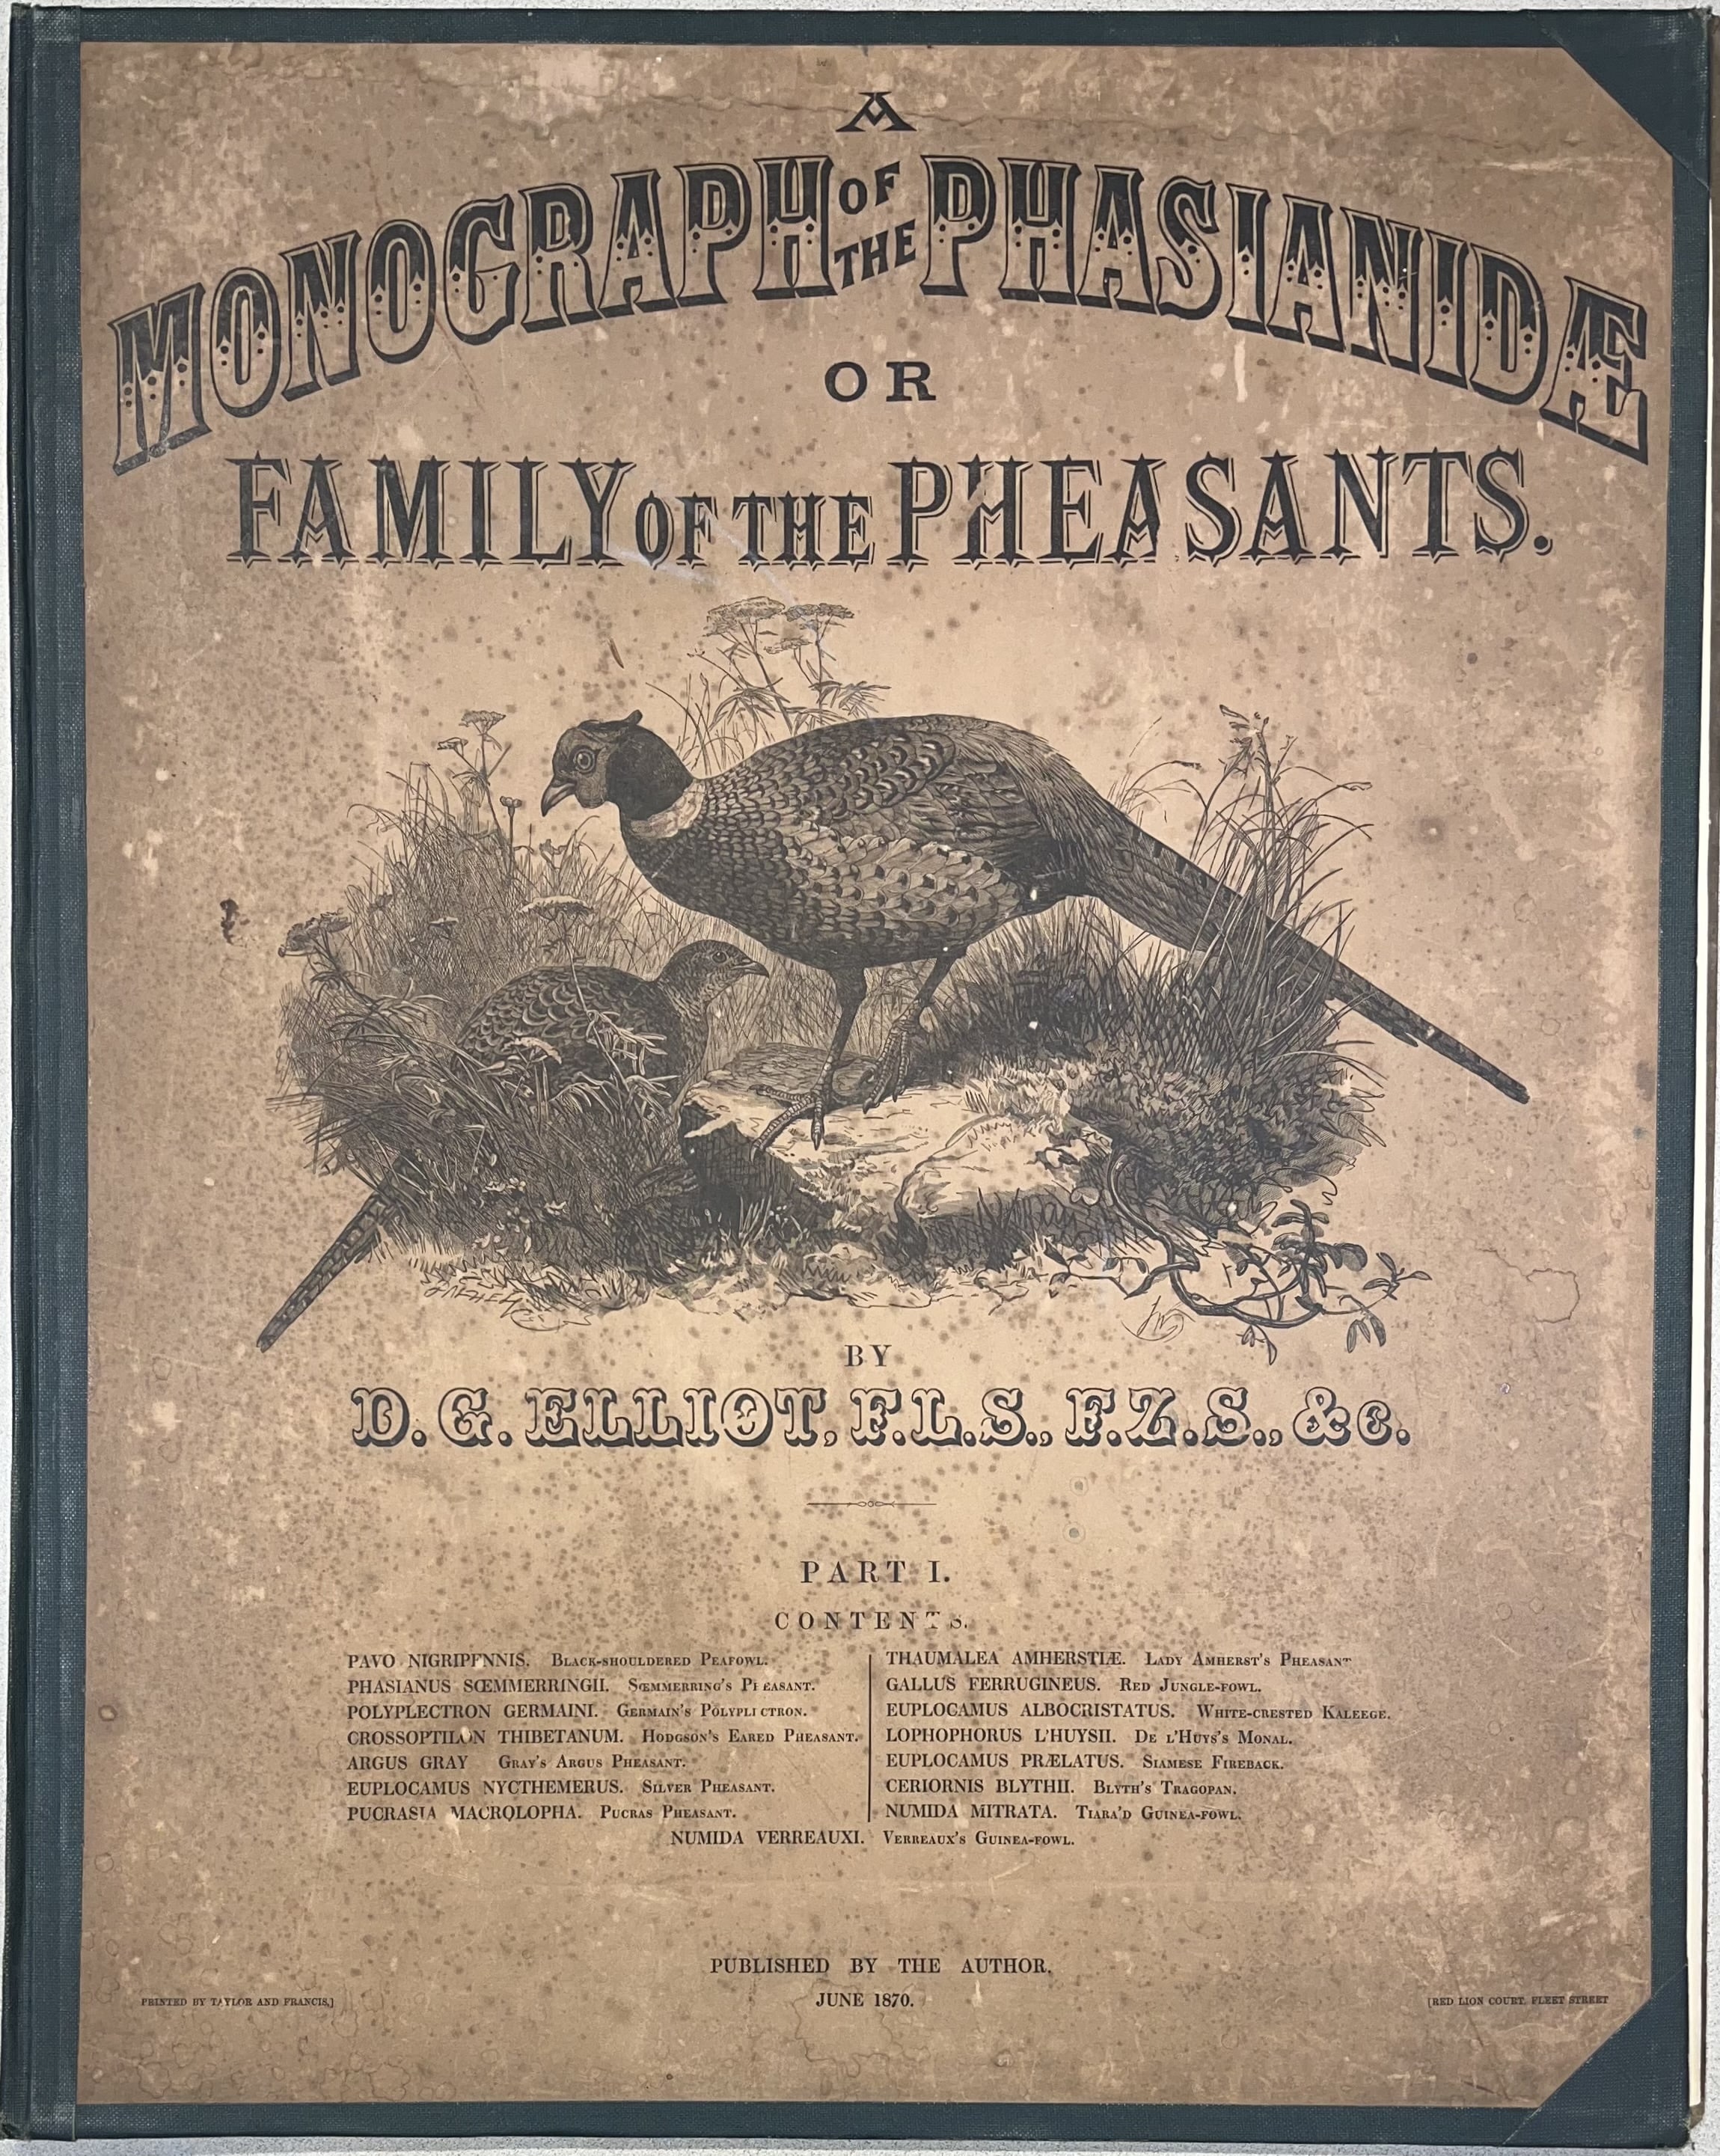 Elliot's pheasants were issued in parts